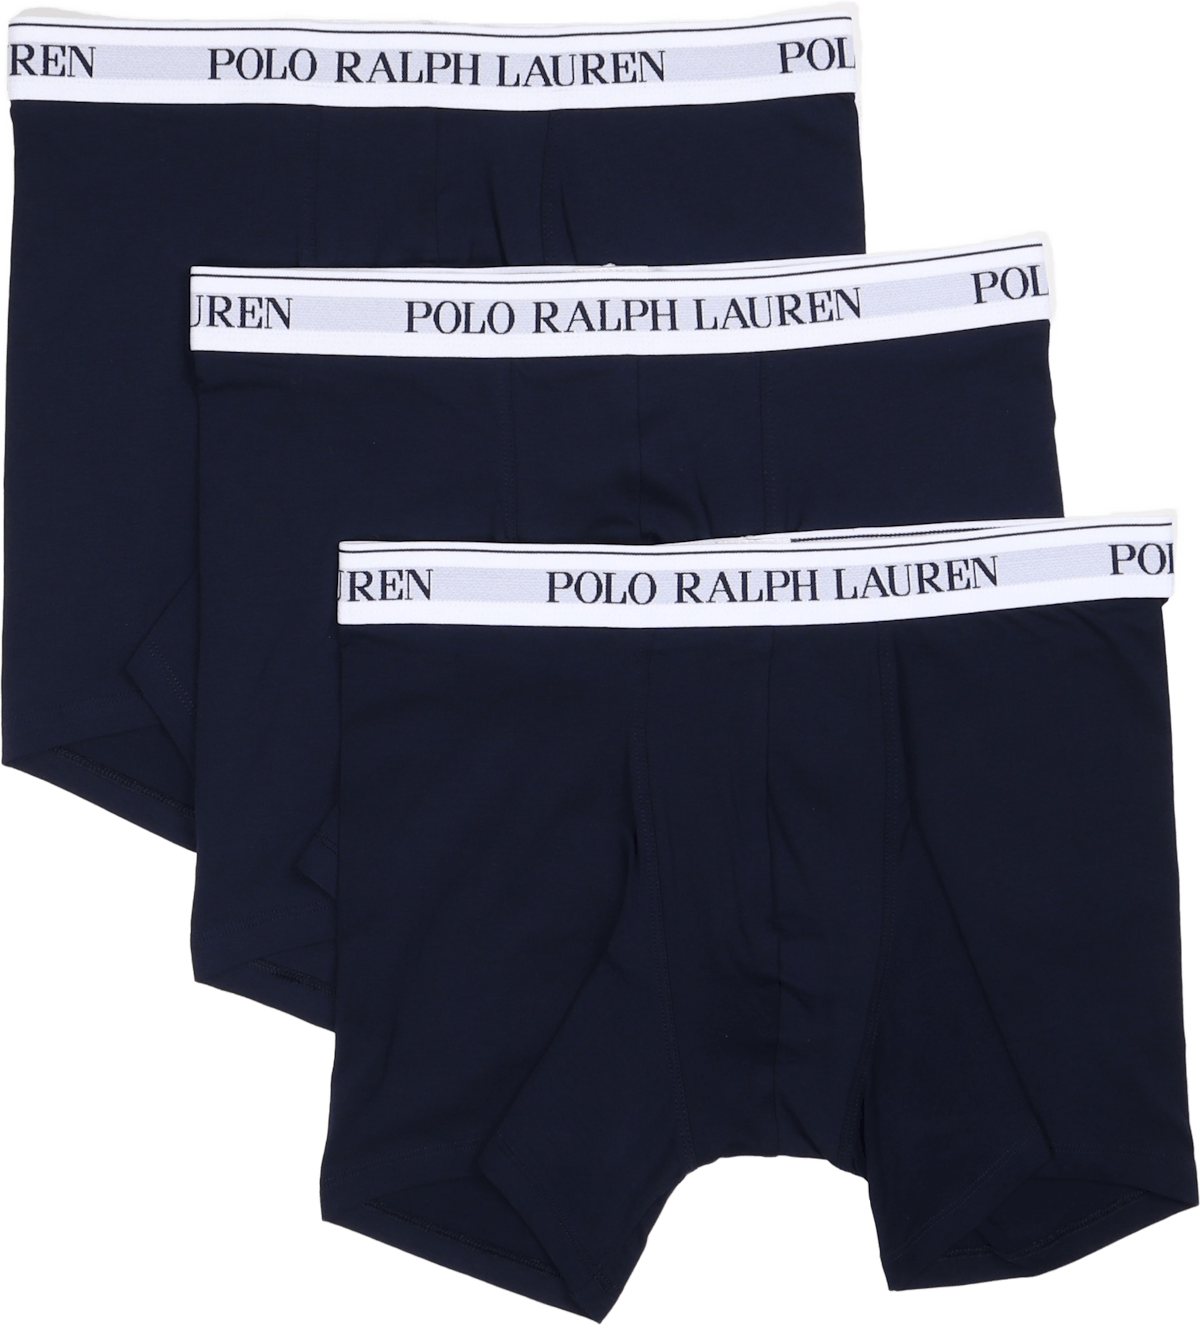 Boxer Brief-3 Pack-boxer Brief 3pk Nvy Wht/nvy Wht/nvy Wht